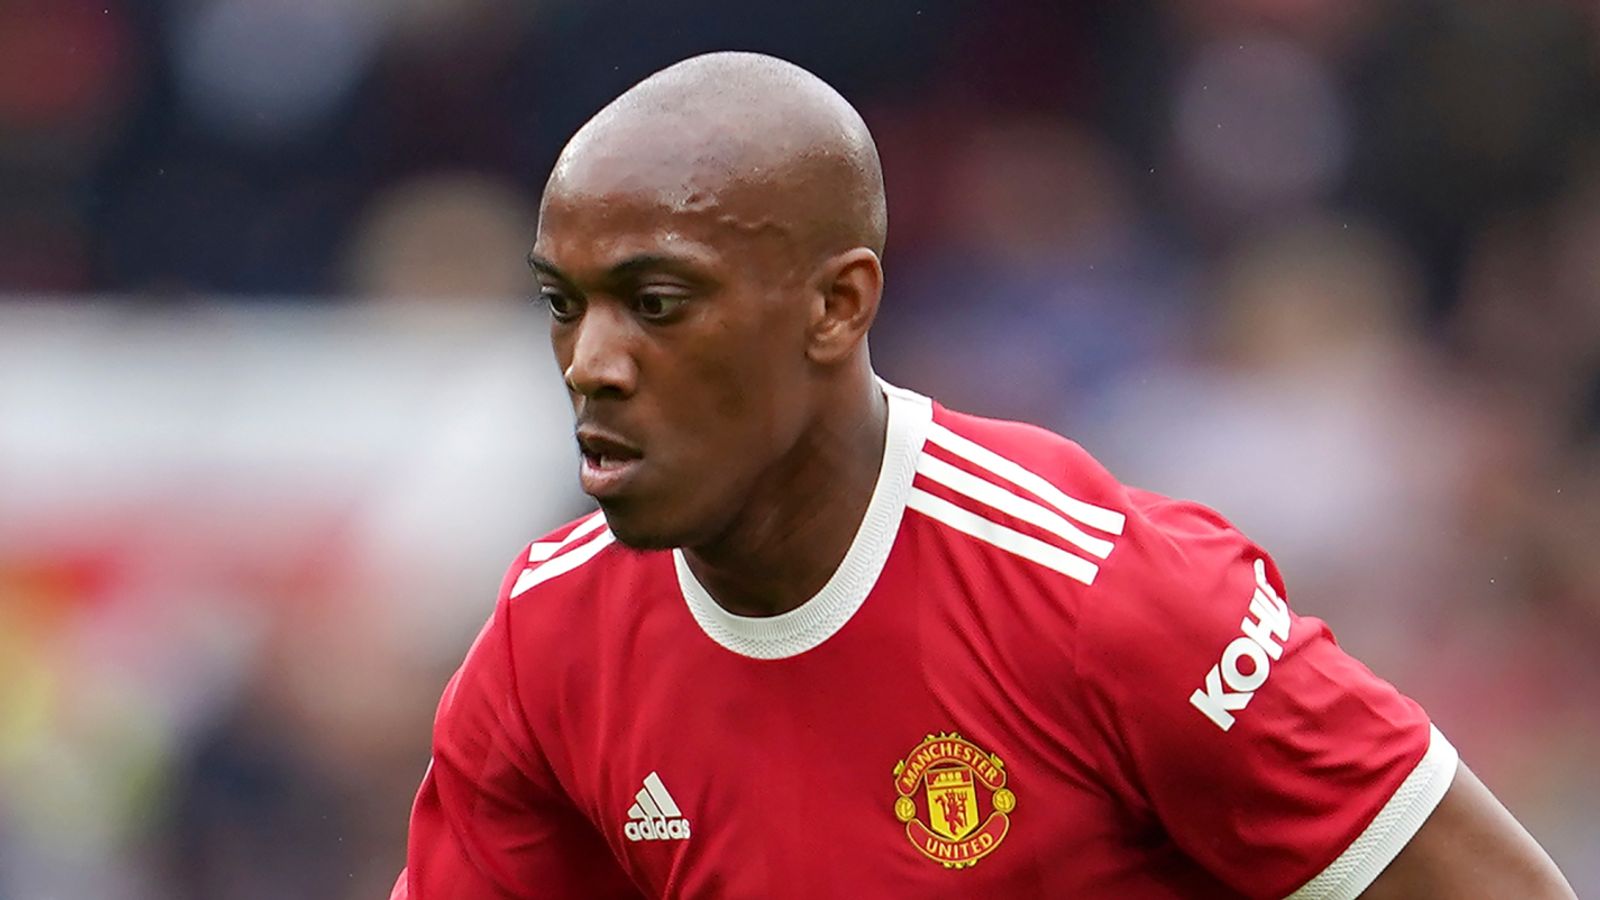 Man Utd transfer rumours: Martial priced out of Juve move thumbnail